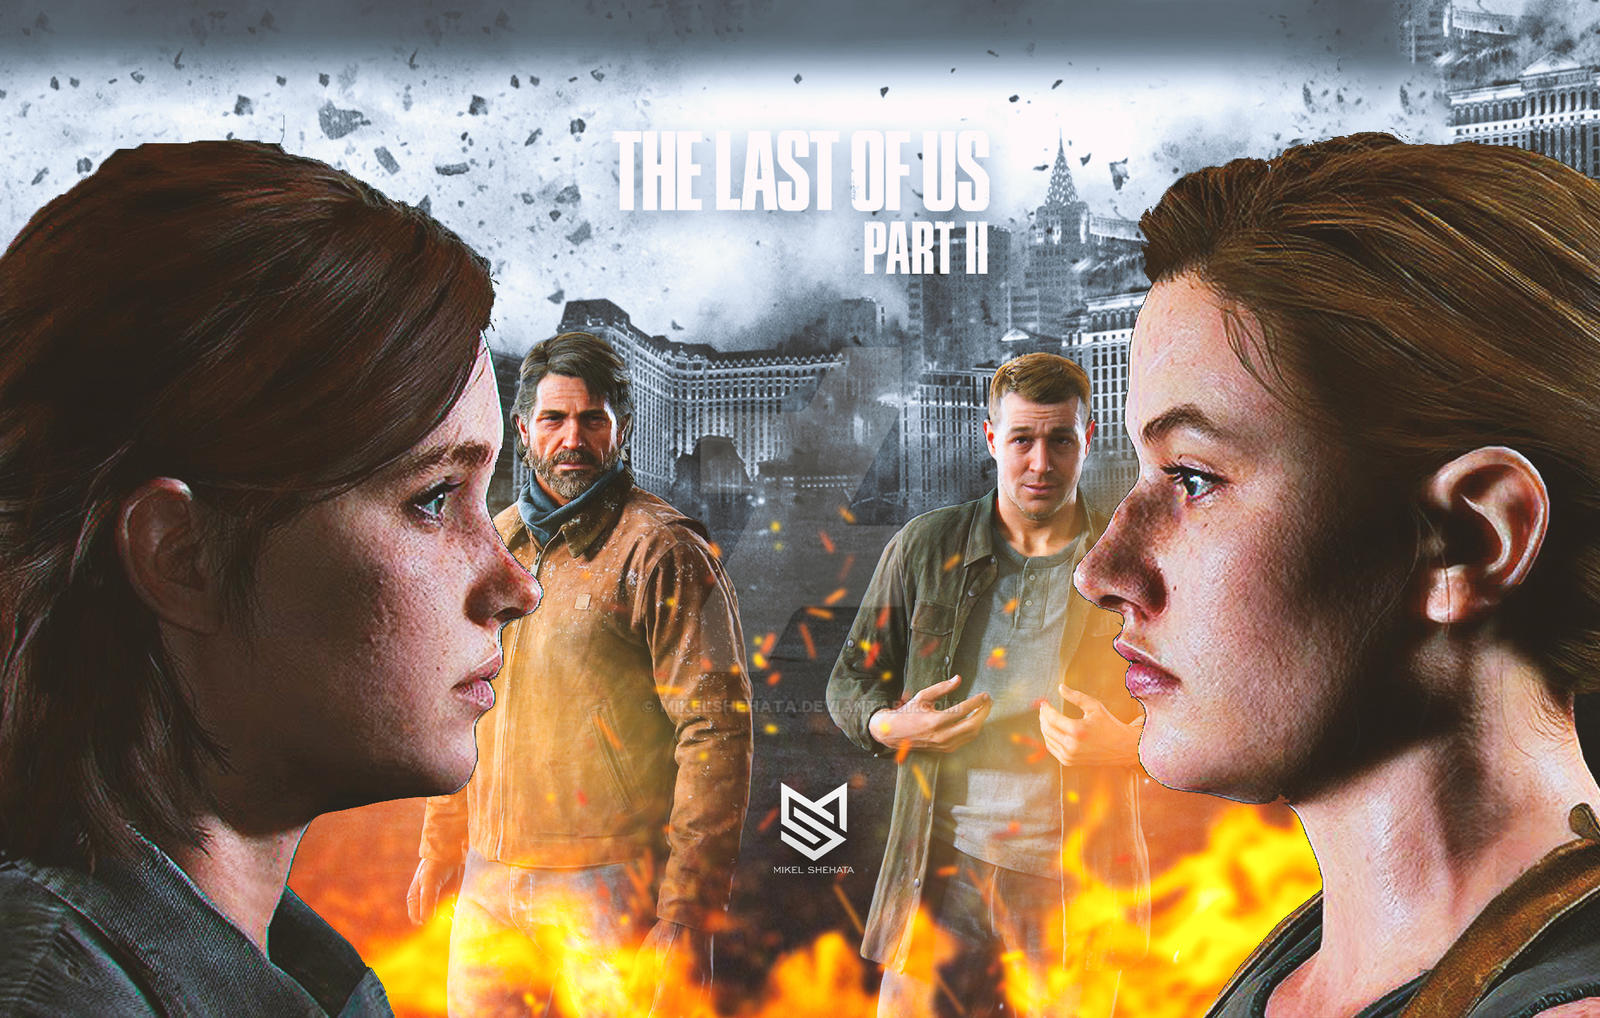 The Last of Us 2 - Joel and Ellie Wallpaper by mikelshehata on